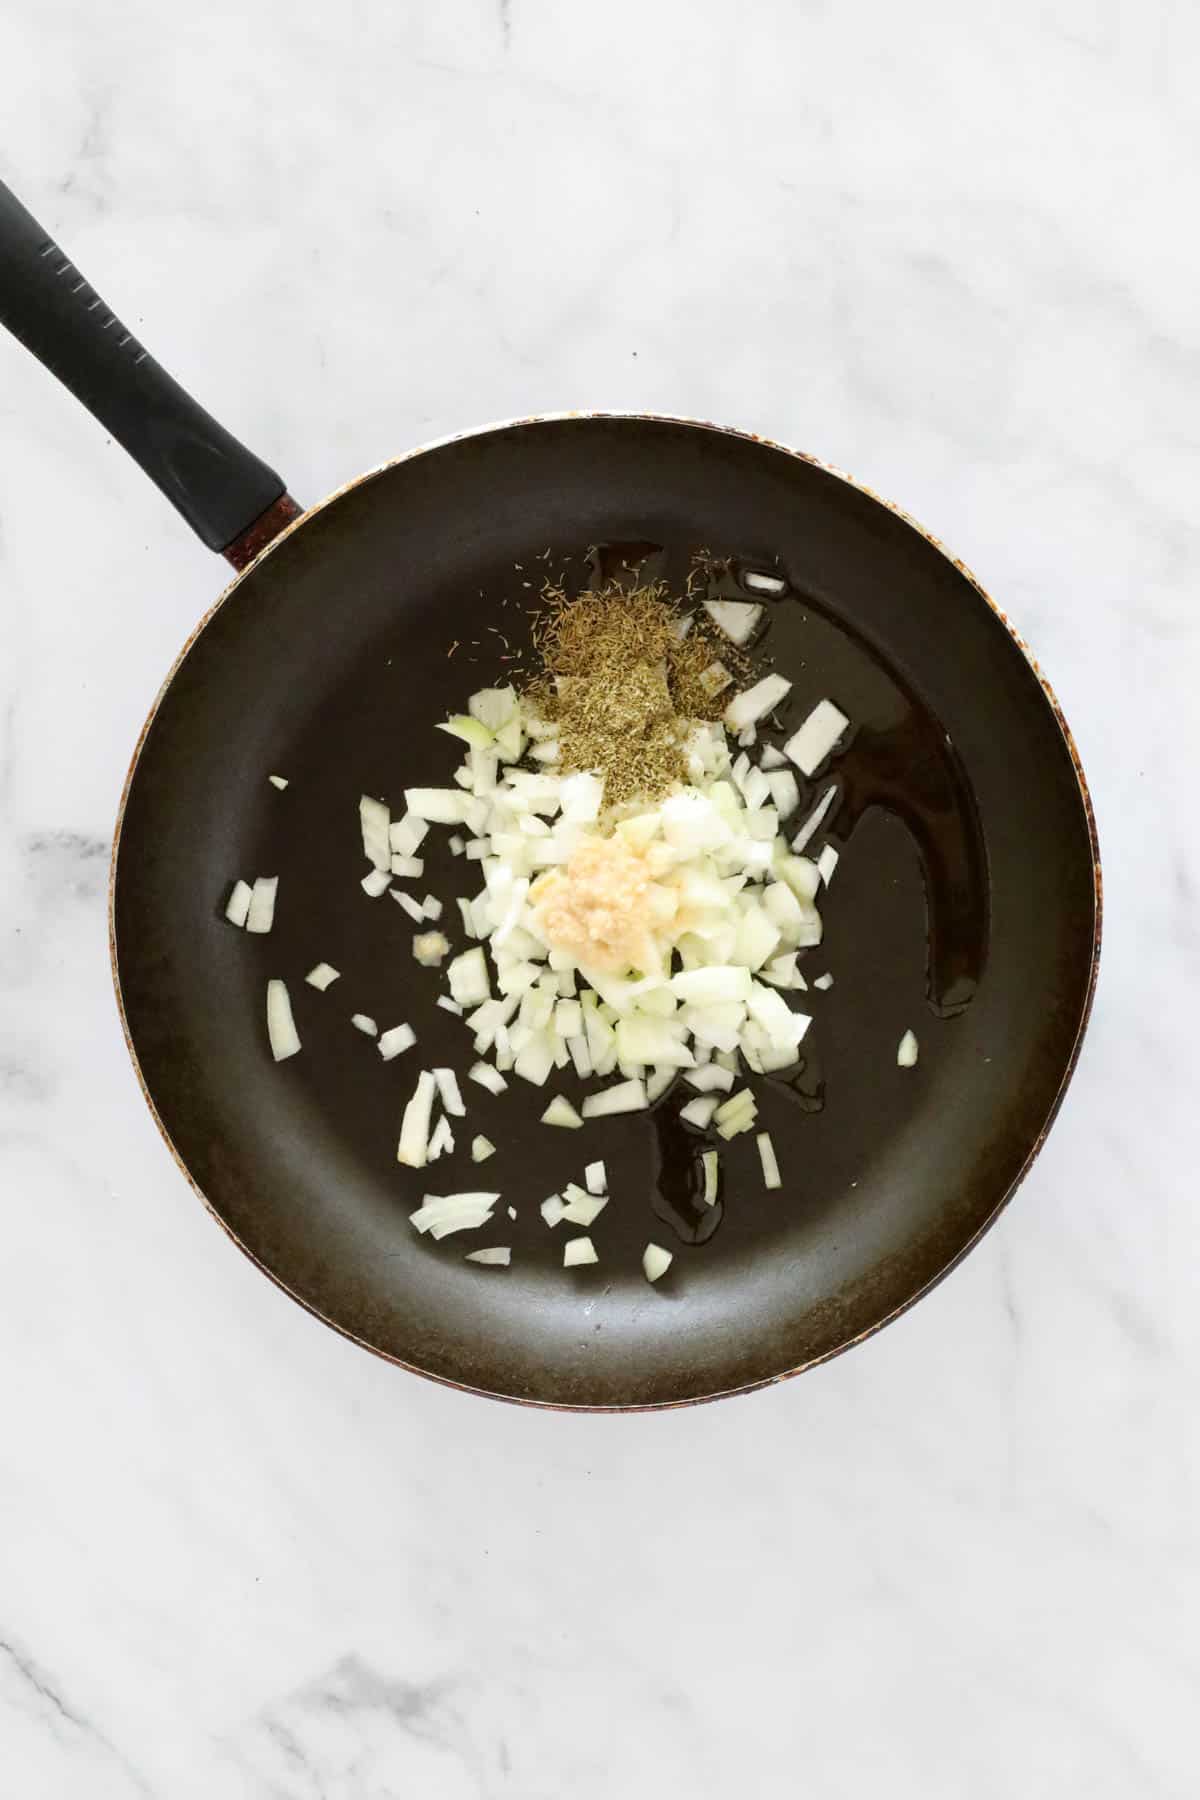 Onion, garlic and dried herbs in a frying pan.